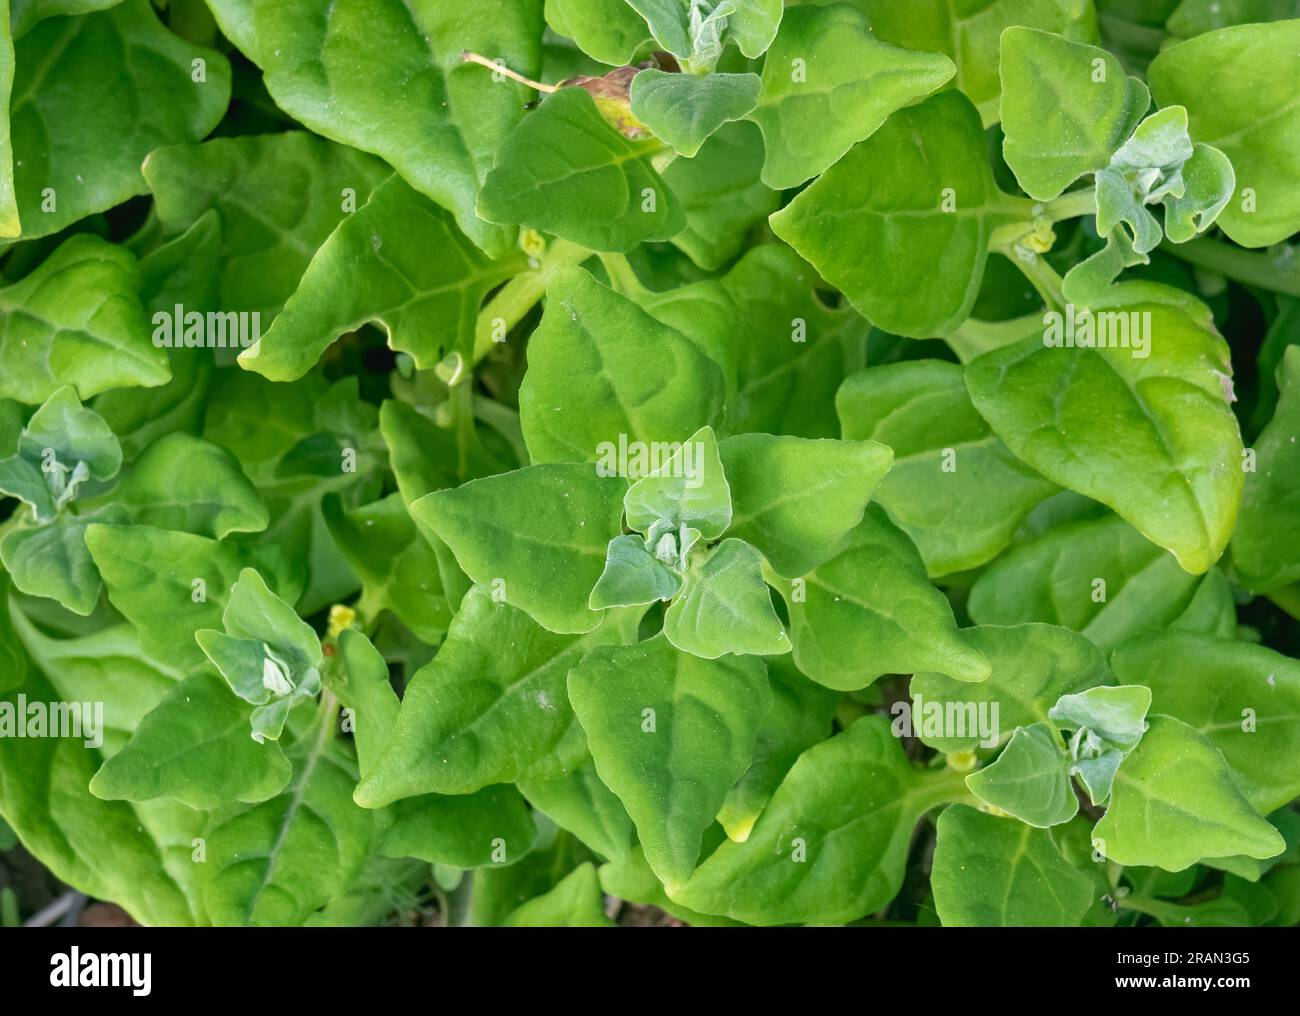 Tetragonia leaves from new zealand spinach plant close up view from above outdoor Stock Photo